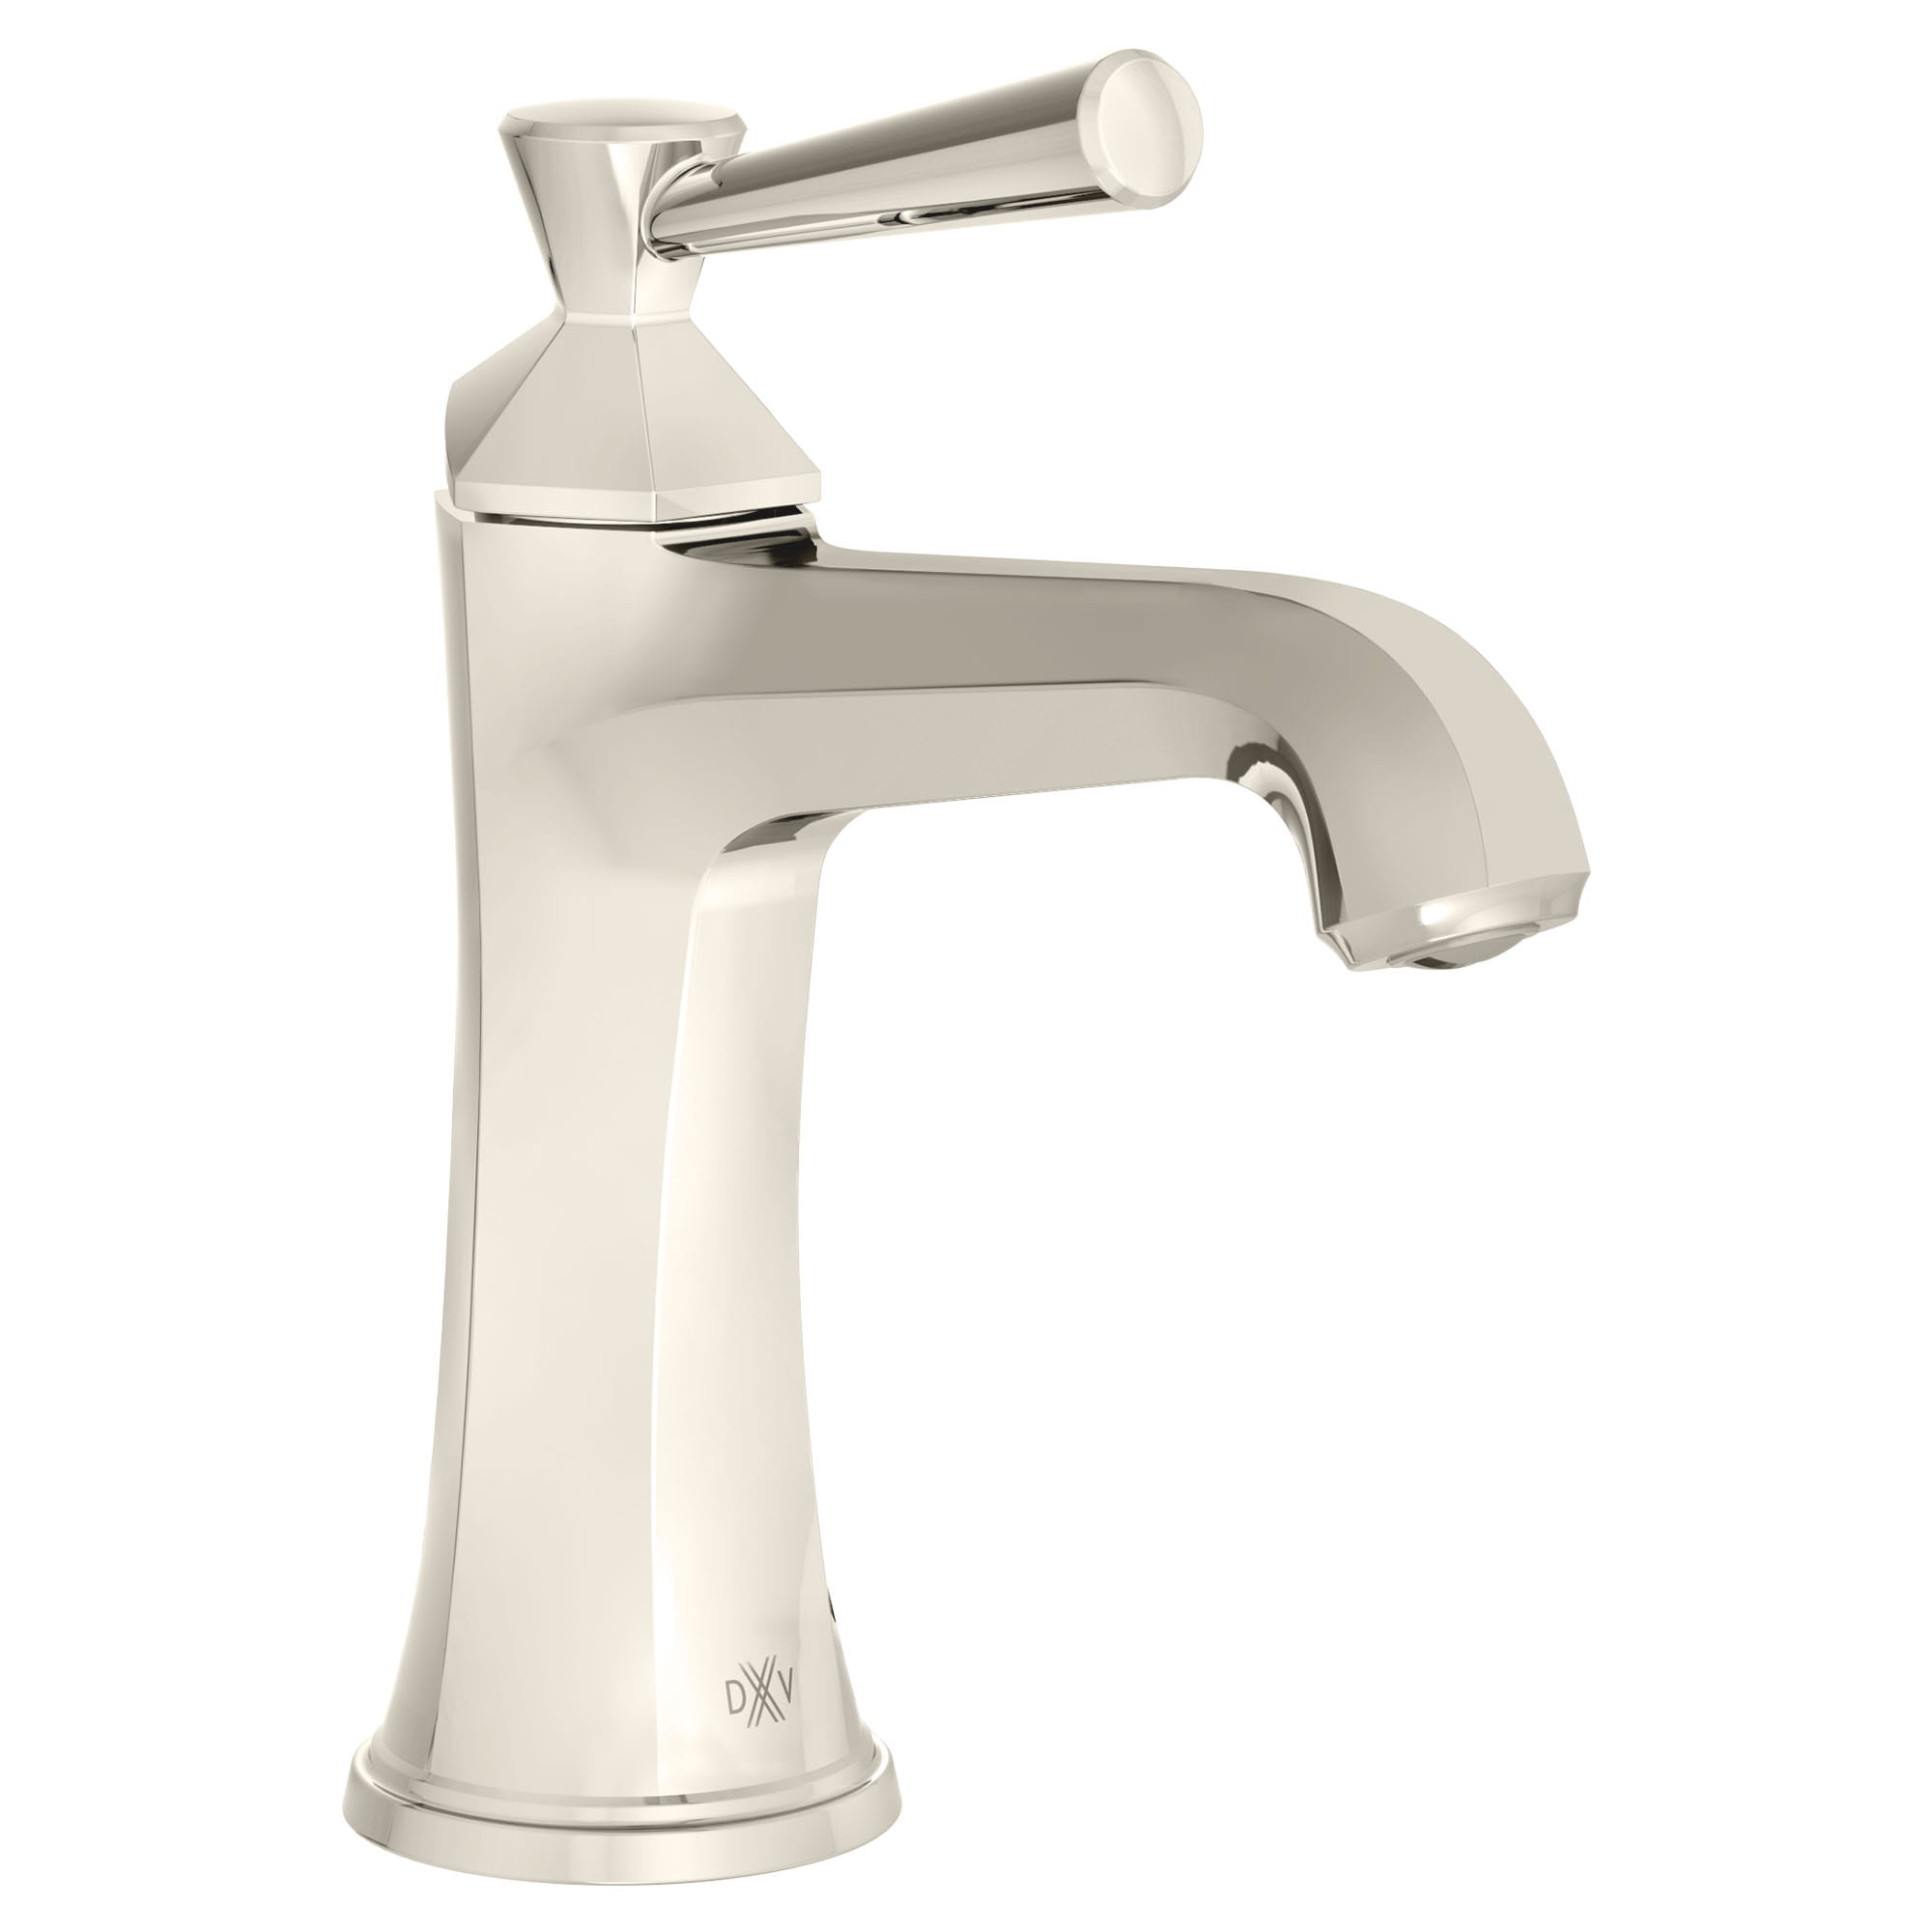 Fitzgerald Single Handle Bathroom Facuet with Lever Handle